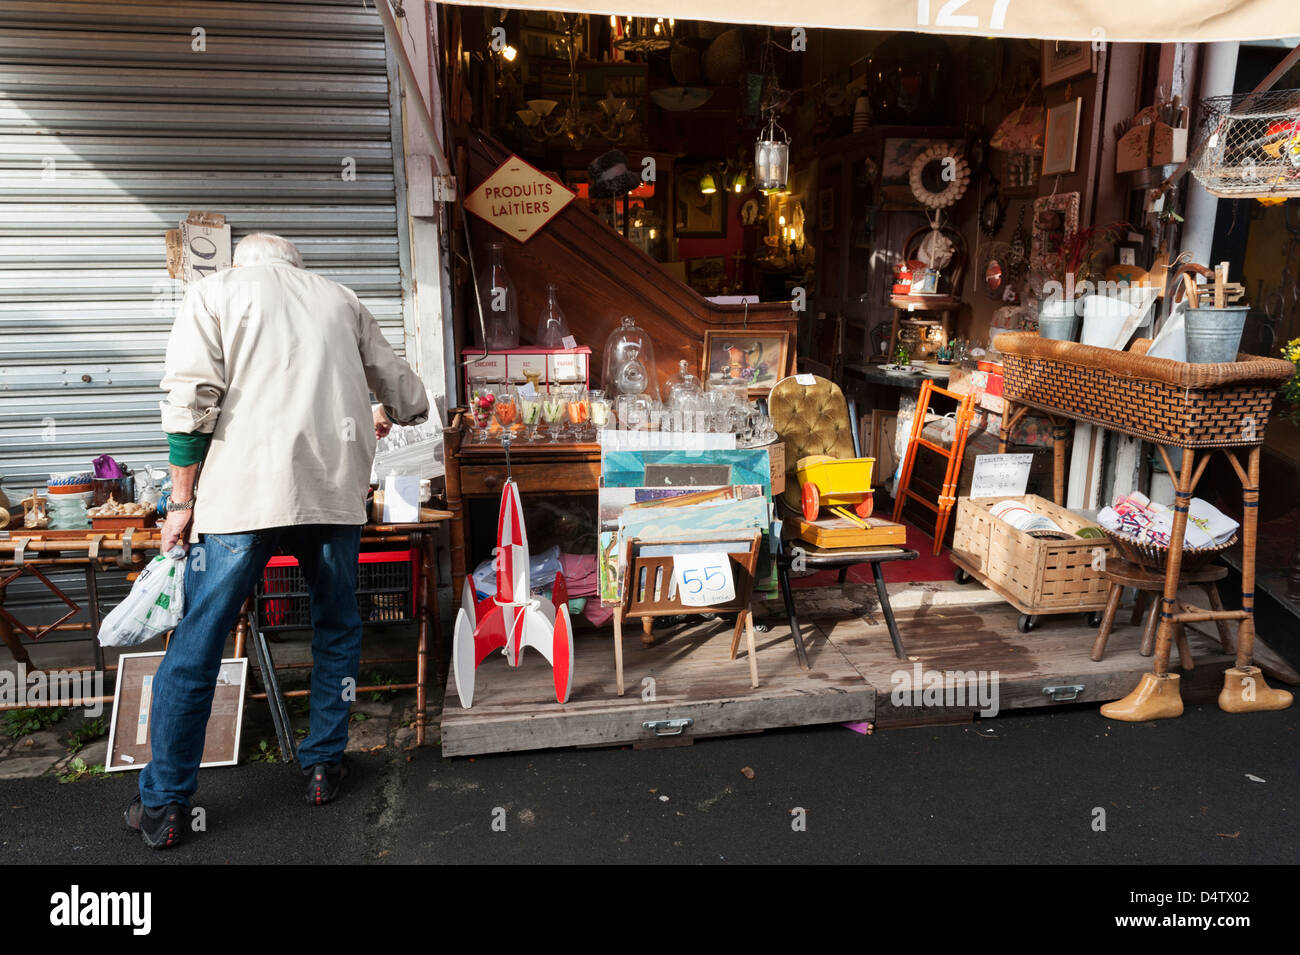 Marché aux Puces (flea market) at St-Ouen near to Clignancourt in the north of Paris, France. Stock Photo